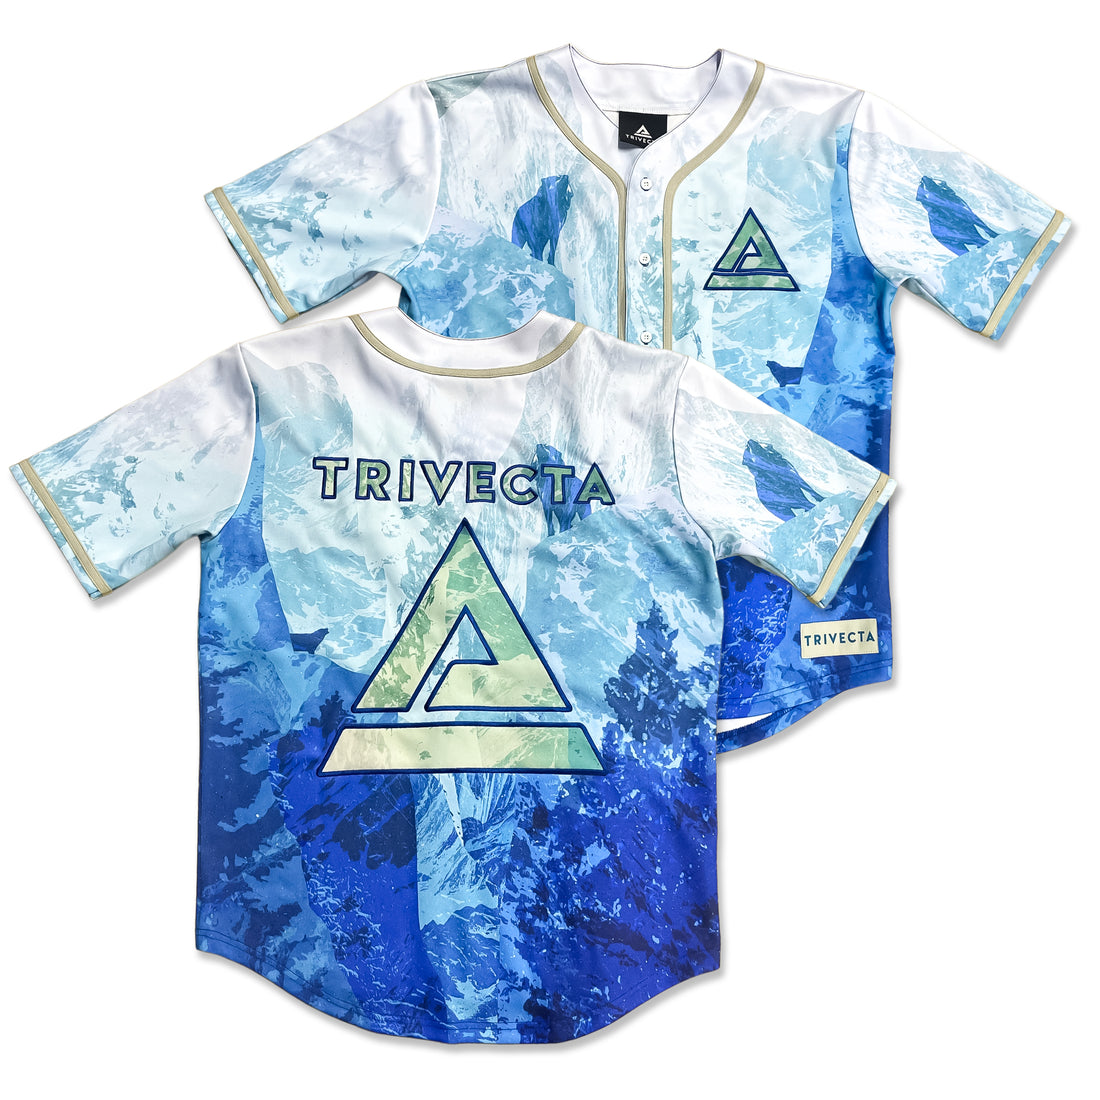 Trivecta - Way Back Up Jersey - Winter Edition